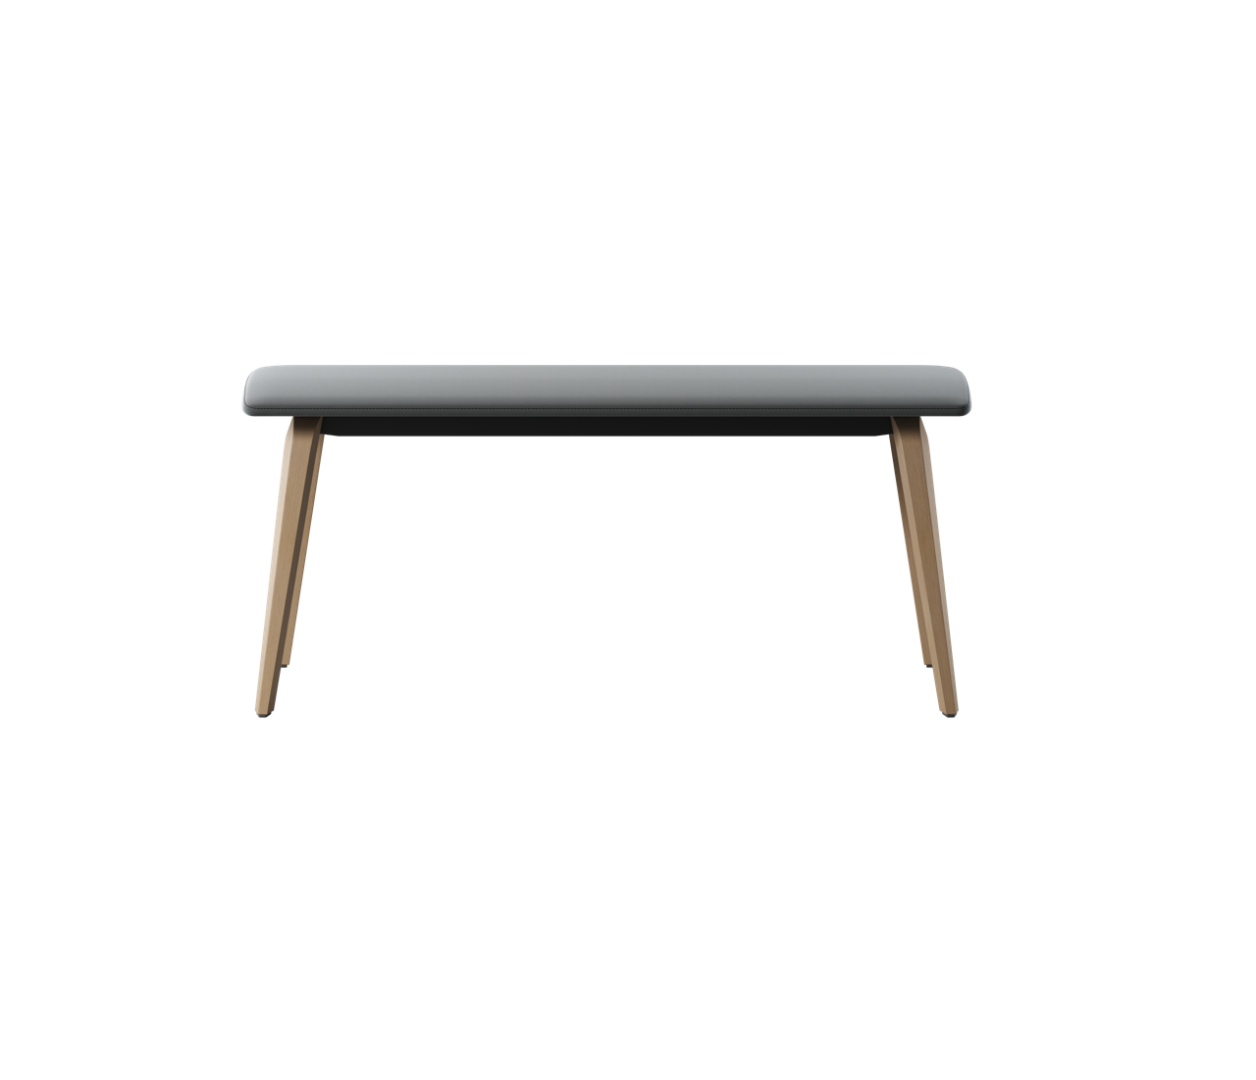 OCEE&FOUR – Stools & Benches – Share Bench – Packshot Image(39) Large